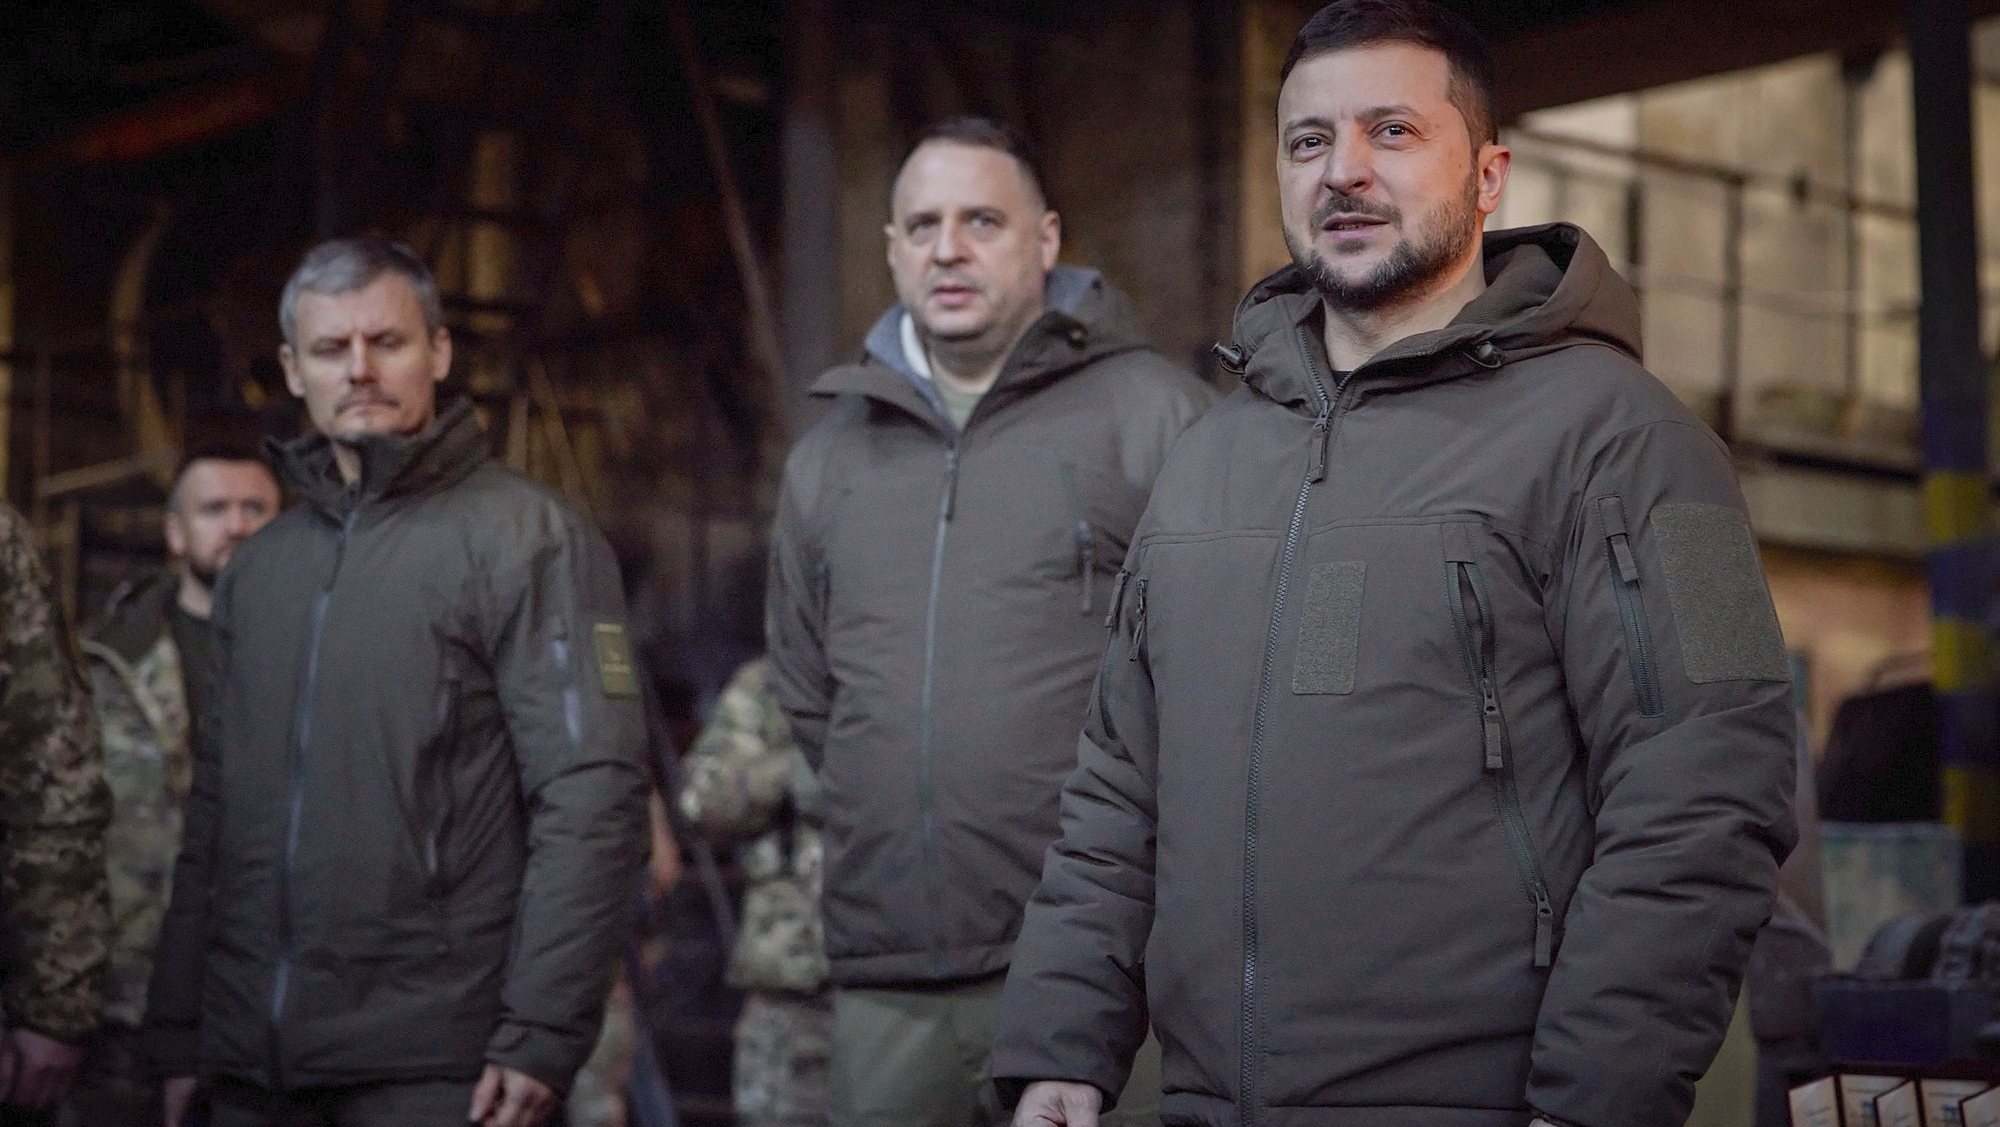 epa10374716 A handout photo made available by the Ukrainian Presidential Press Service shows Ukraine&#039;s President Volodymyr Zelensky (R) attending a meeting with Ukrainian servicemen during his visit to Bakhmut, Donetsk region, eastern Ukraine, 20 December 2022, amid Russia&#039;s invasion. Zelensky visited the frontline city of Bakhmut where he presented state awards to Ukrainian military personnel, the Ukraine&#039;s Presidential office said in a statement. Russian troops entered Ukraine on 24 February 2022 starting a conflict that has provoked destruction and a humanitarian crisis.  EPA/UKRAINIAN PRESIDENTIAL PRESS SERVICE HANDOUT -- MANDATORY CREDIT: UKRAINIAN PRESIDENTIAL PRESS SERVICE -- HANDOUT EDITORIAL USE ONLY/NO SALES